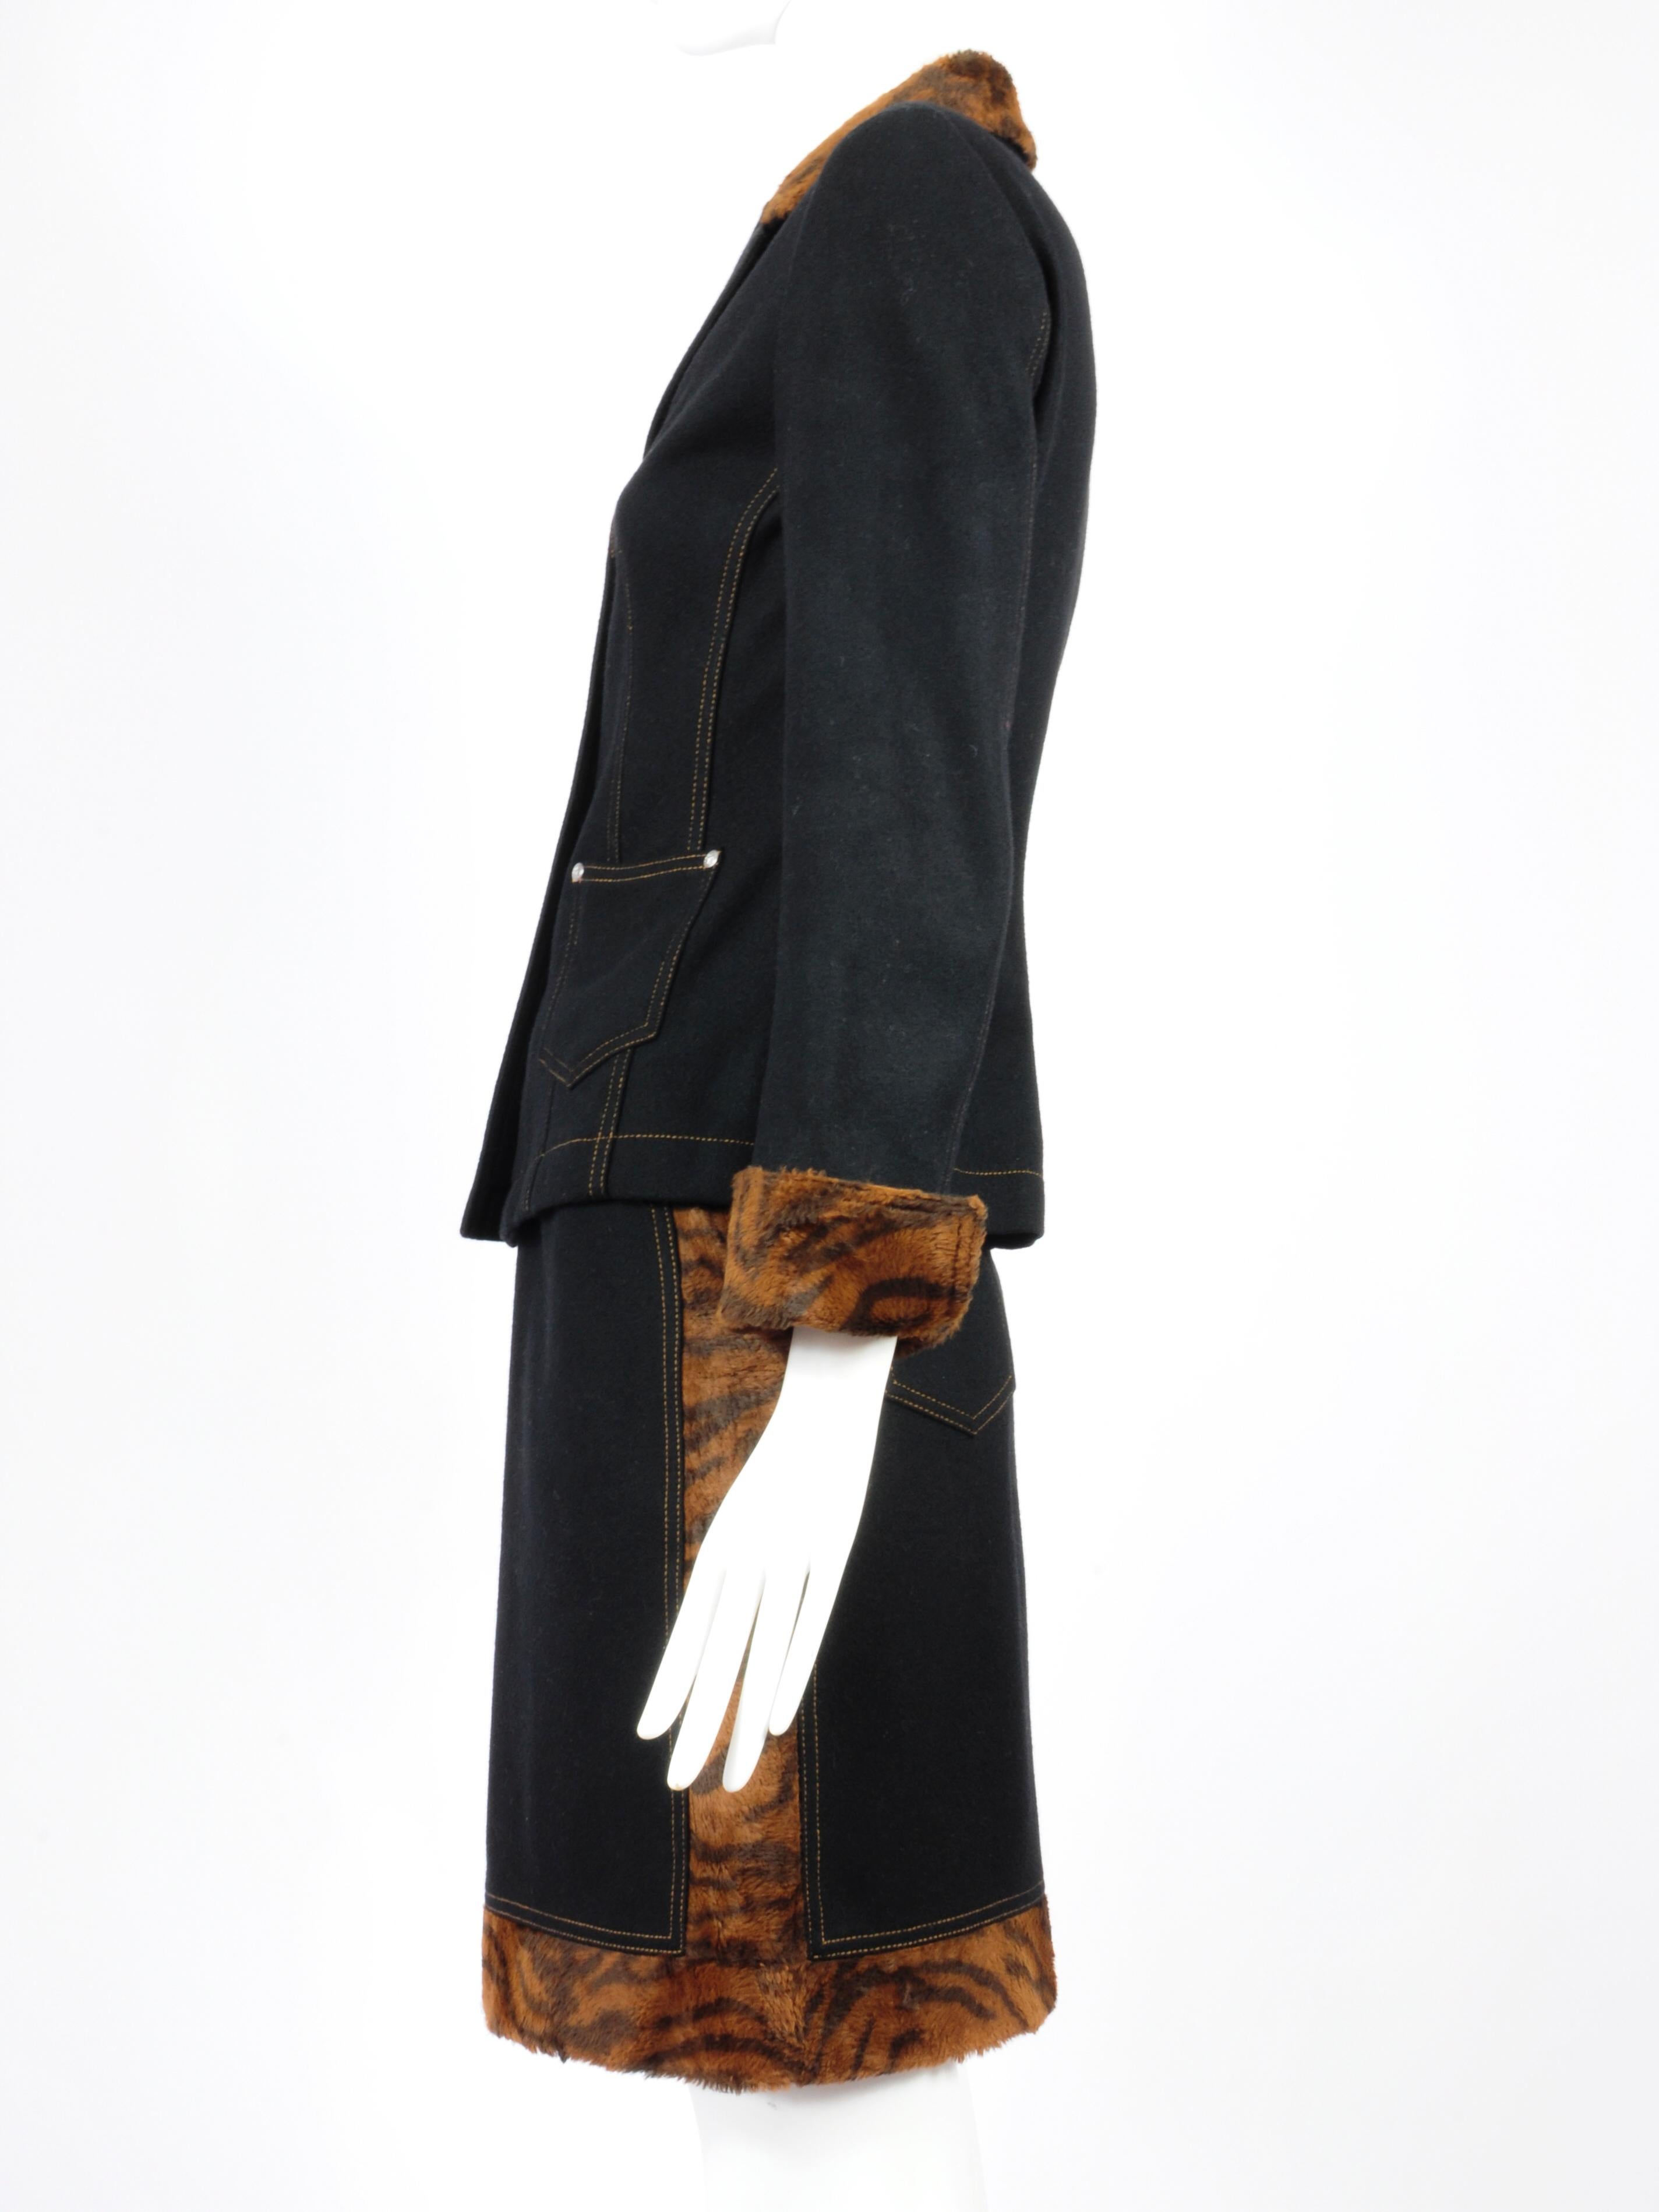 Kenzo Jeans Wool Skirt Suit with Faux Fur Tiger Details 1990s  In Fair Condition For Sale In AMSTERDAM, NL